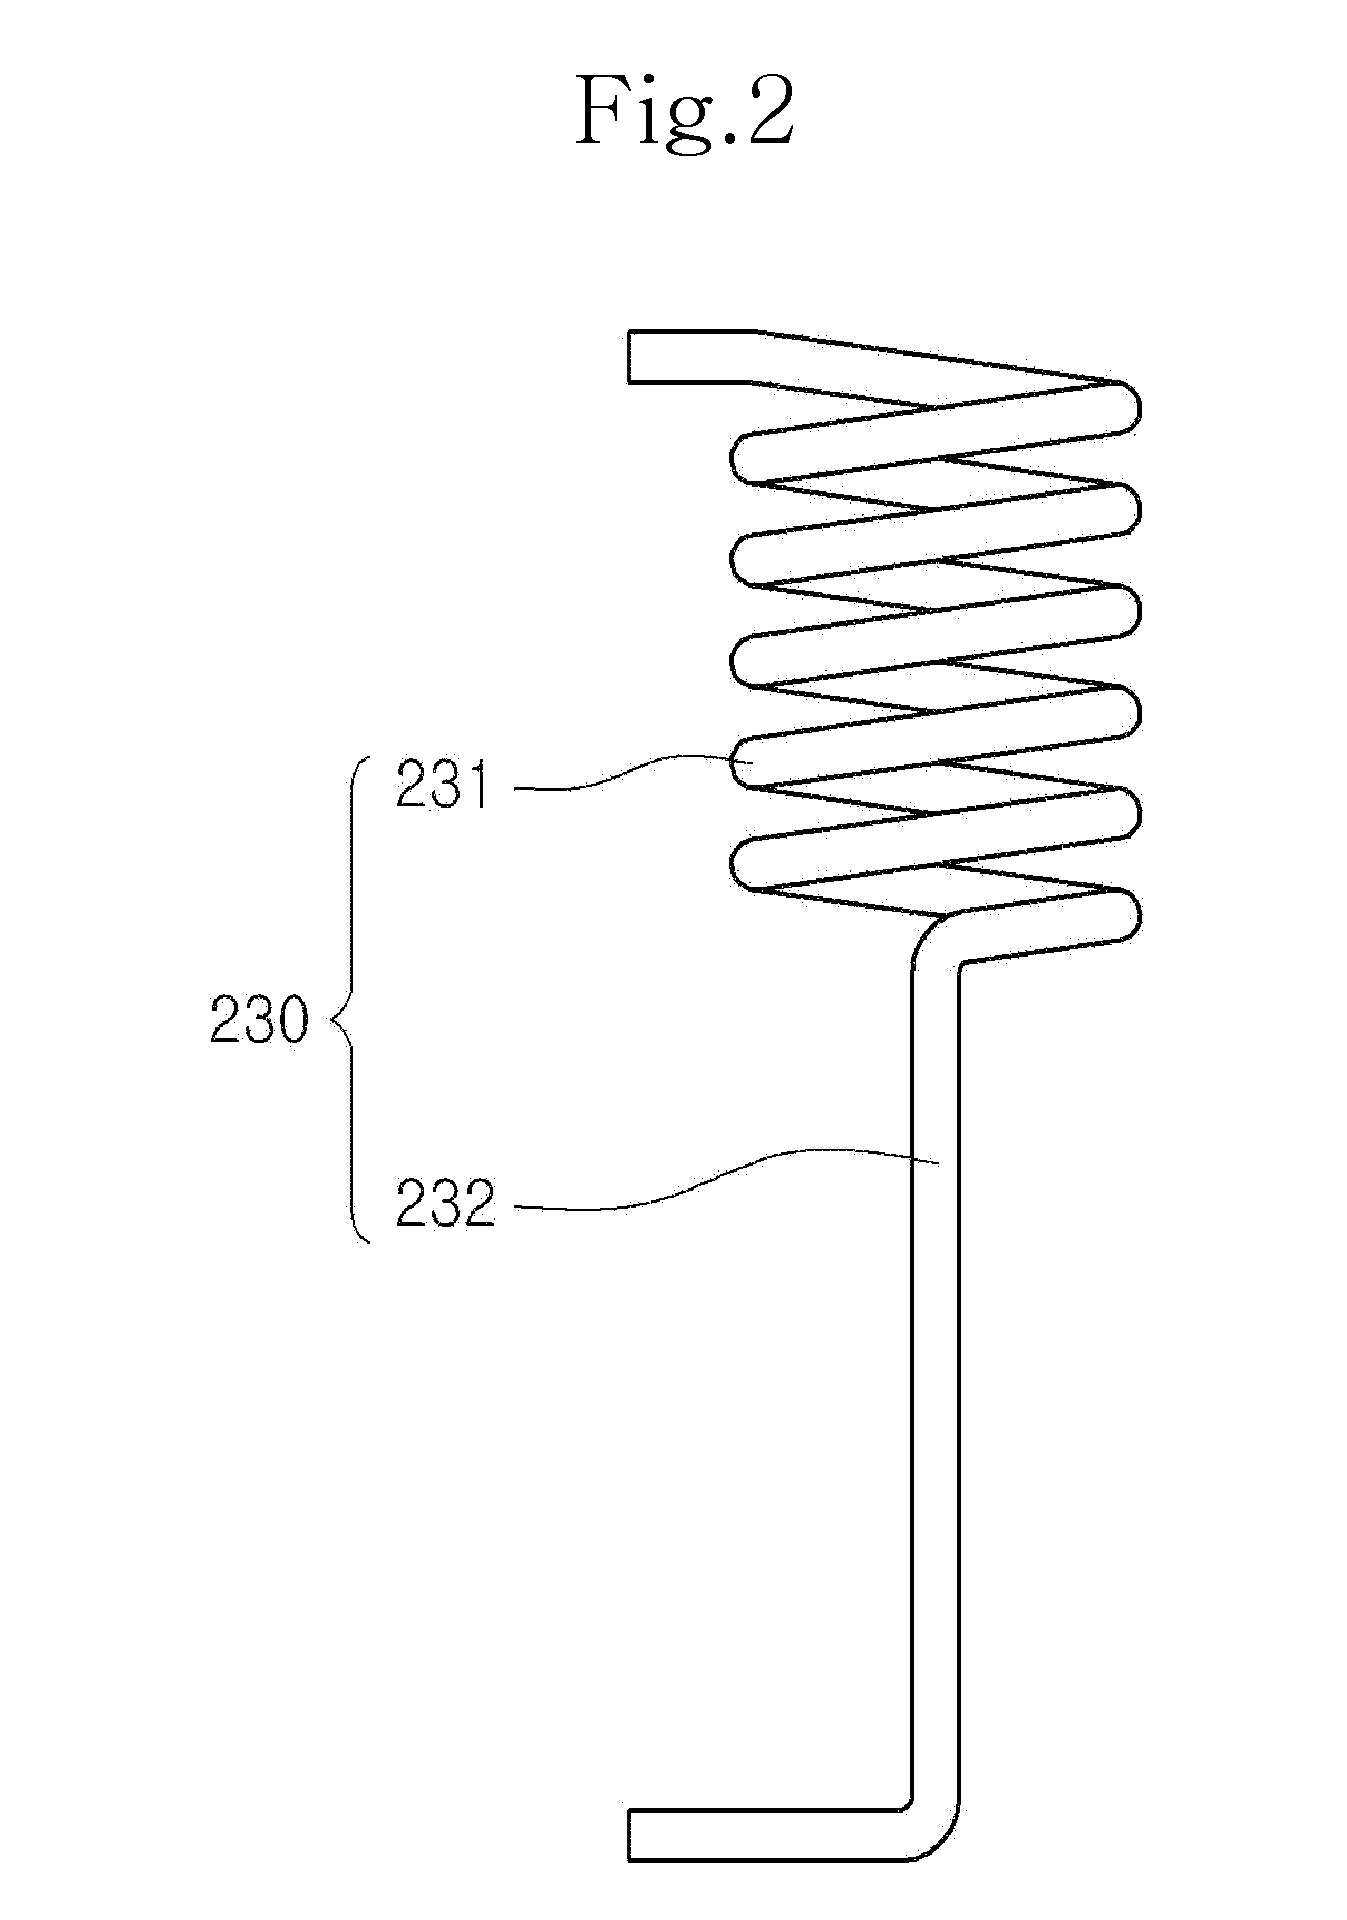 Heat exchanger for passive residual heat removal system